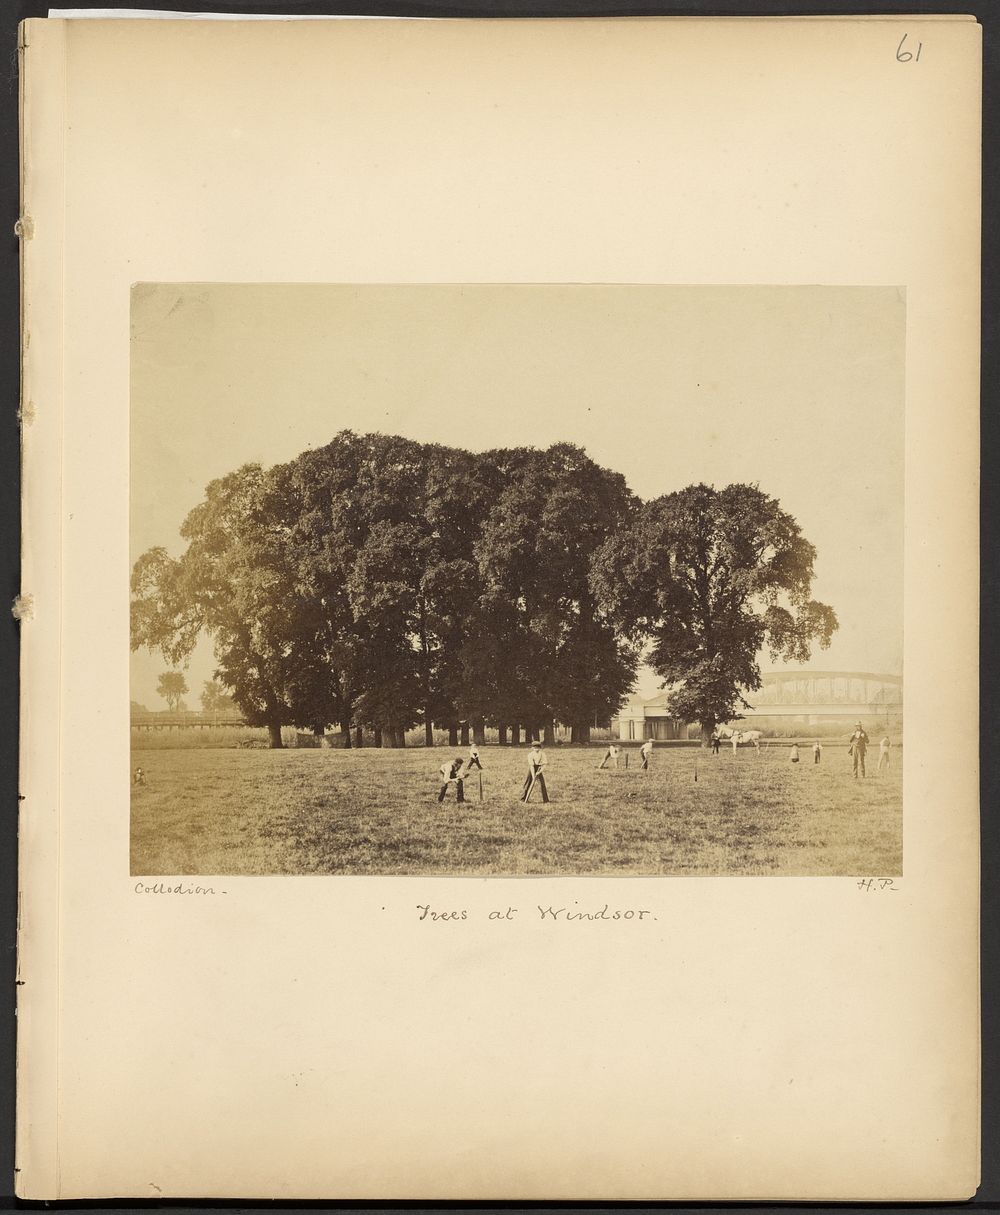 Trees at Windsor by Henry Pollock